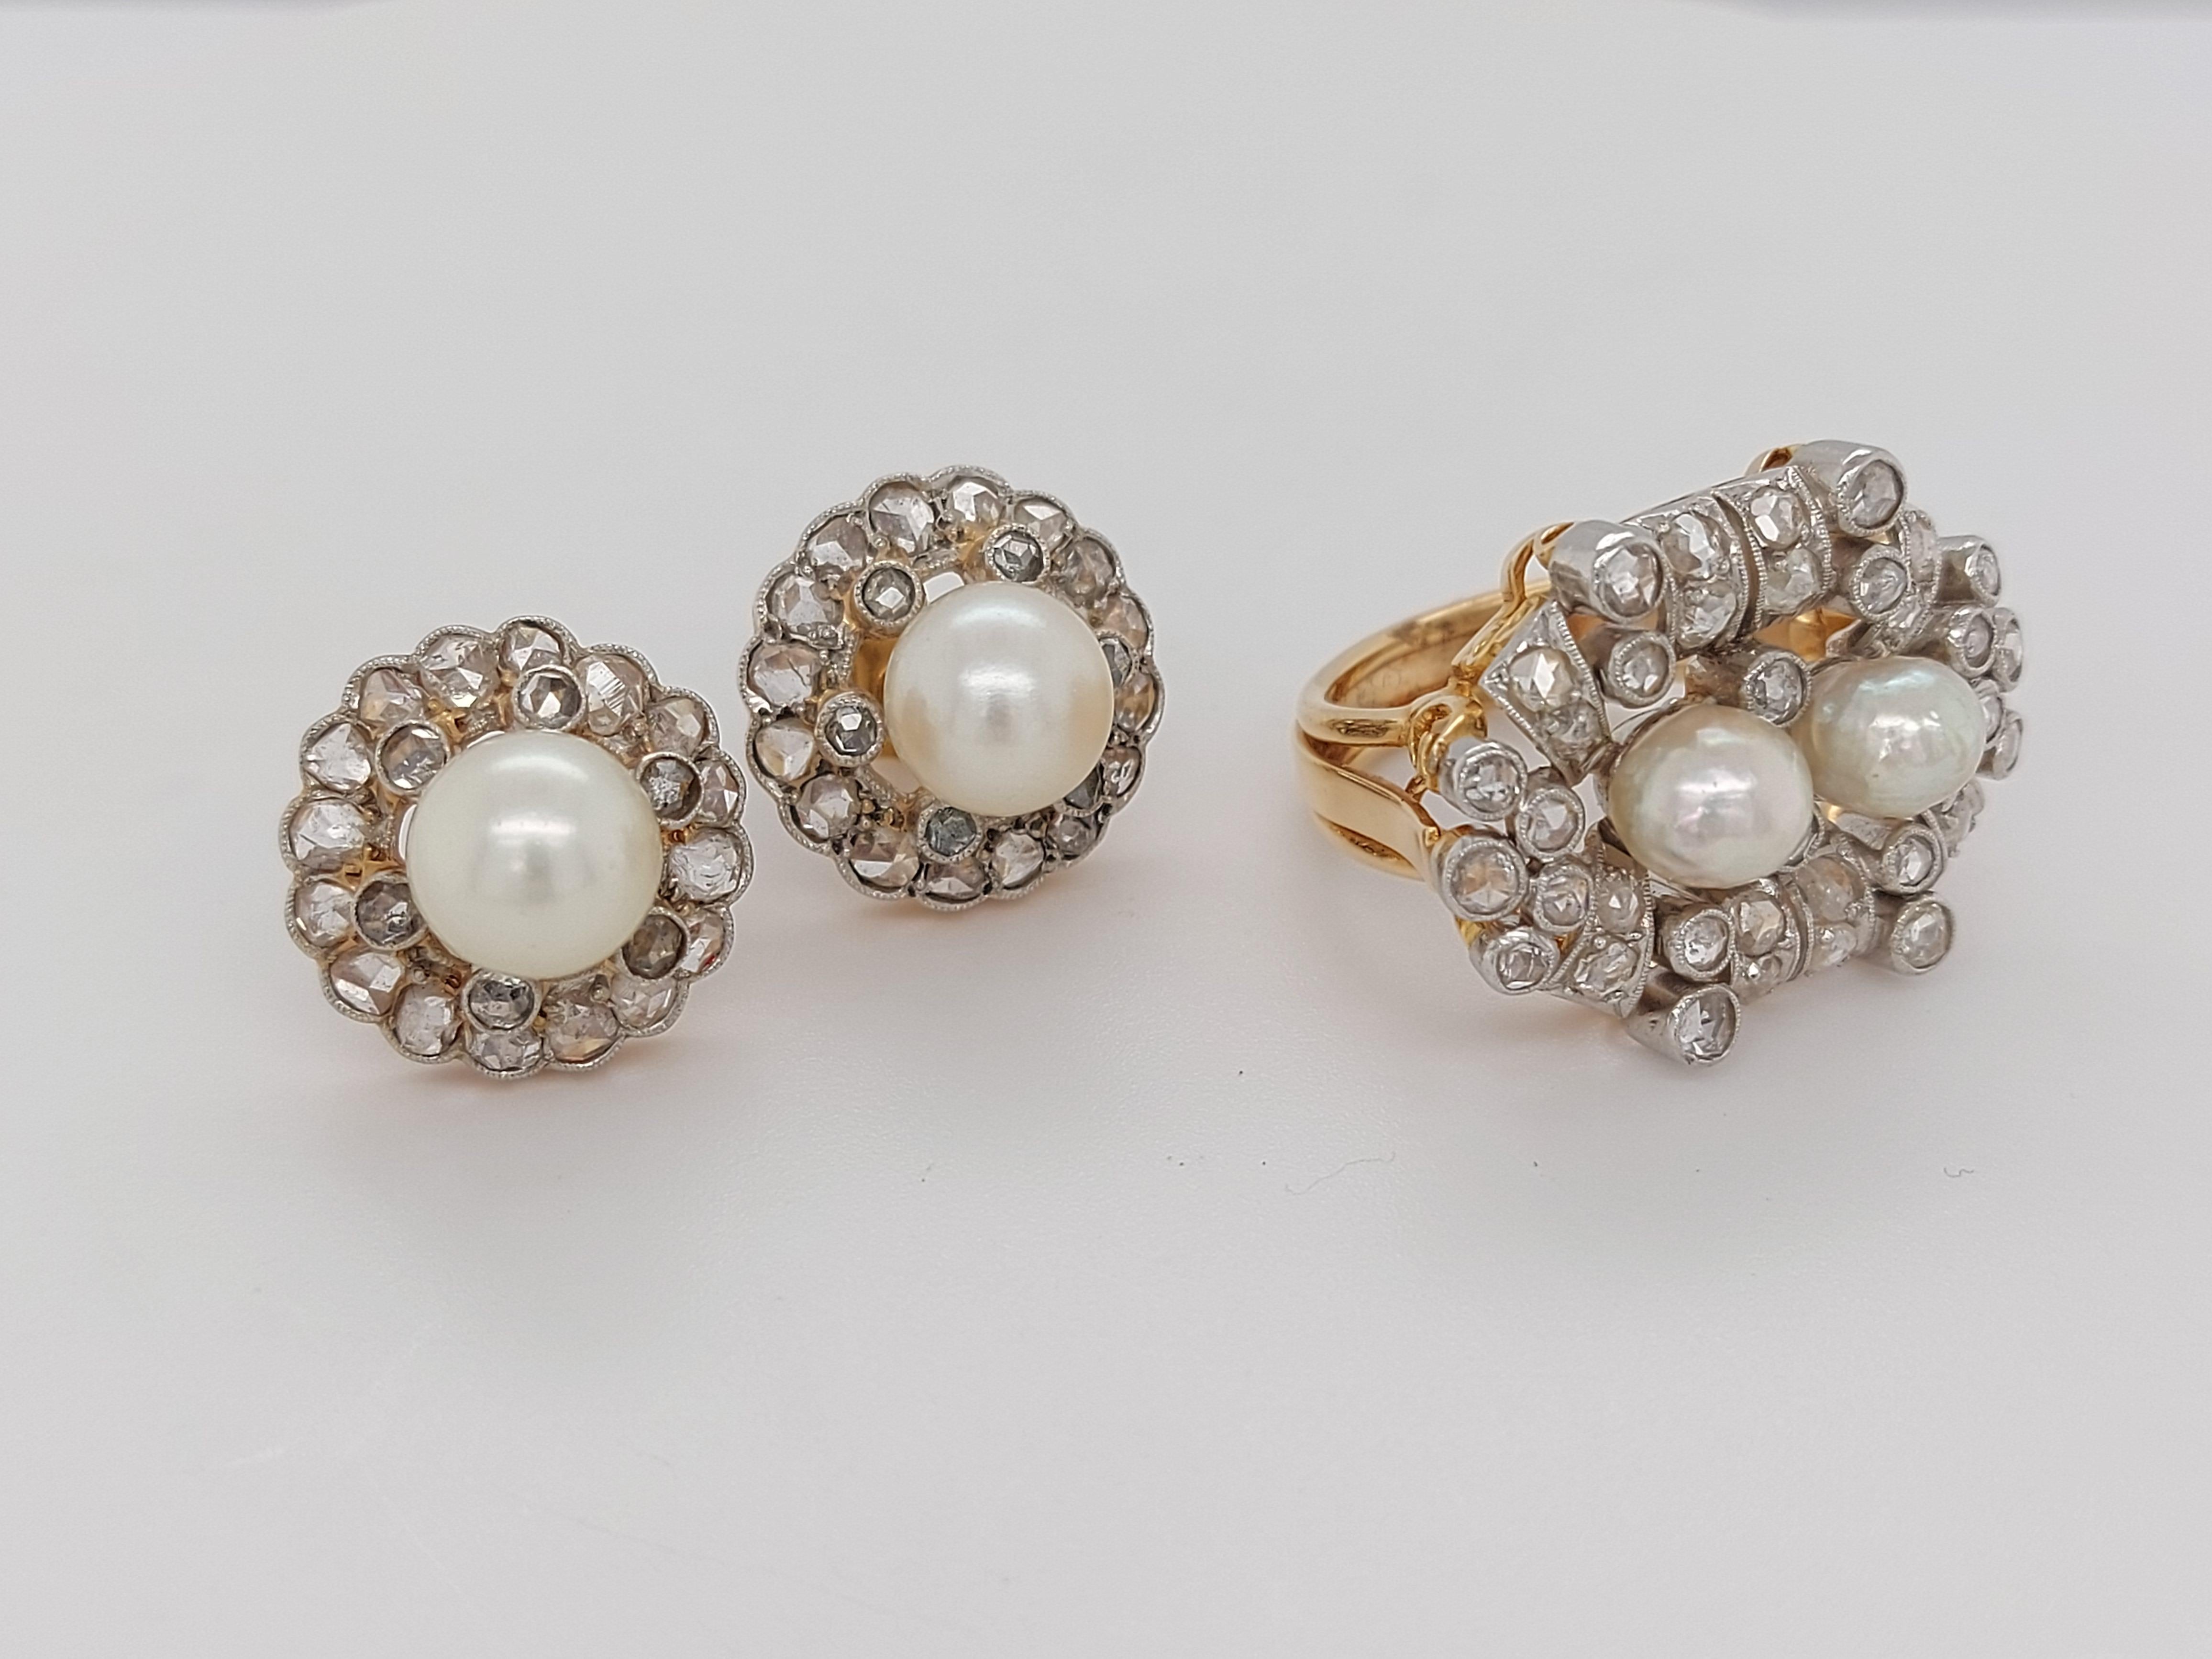 Beautiful Platinum and Gold Ring and Earrings Rose Cut Diamonds and Pearls For Sale 3